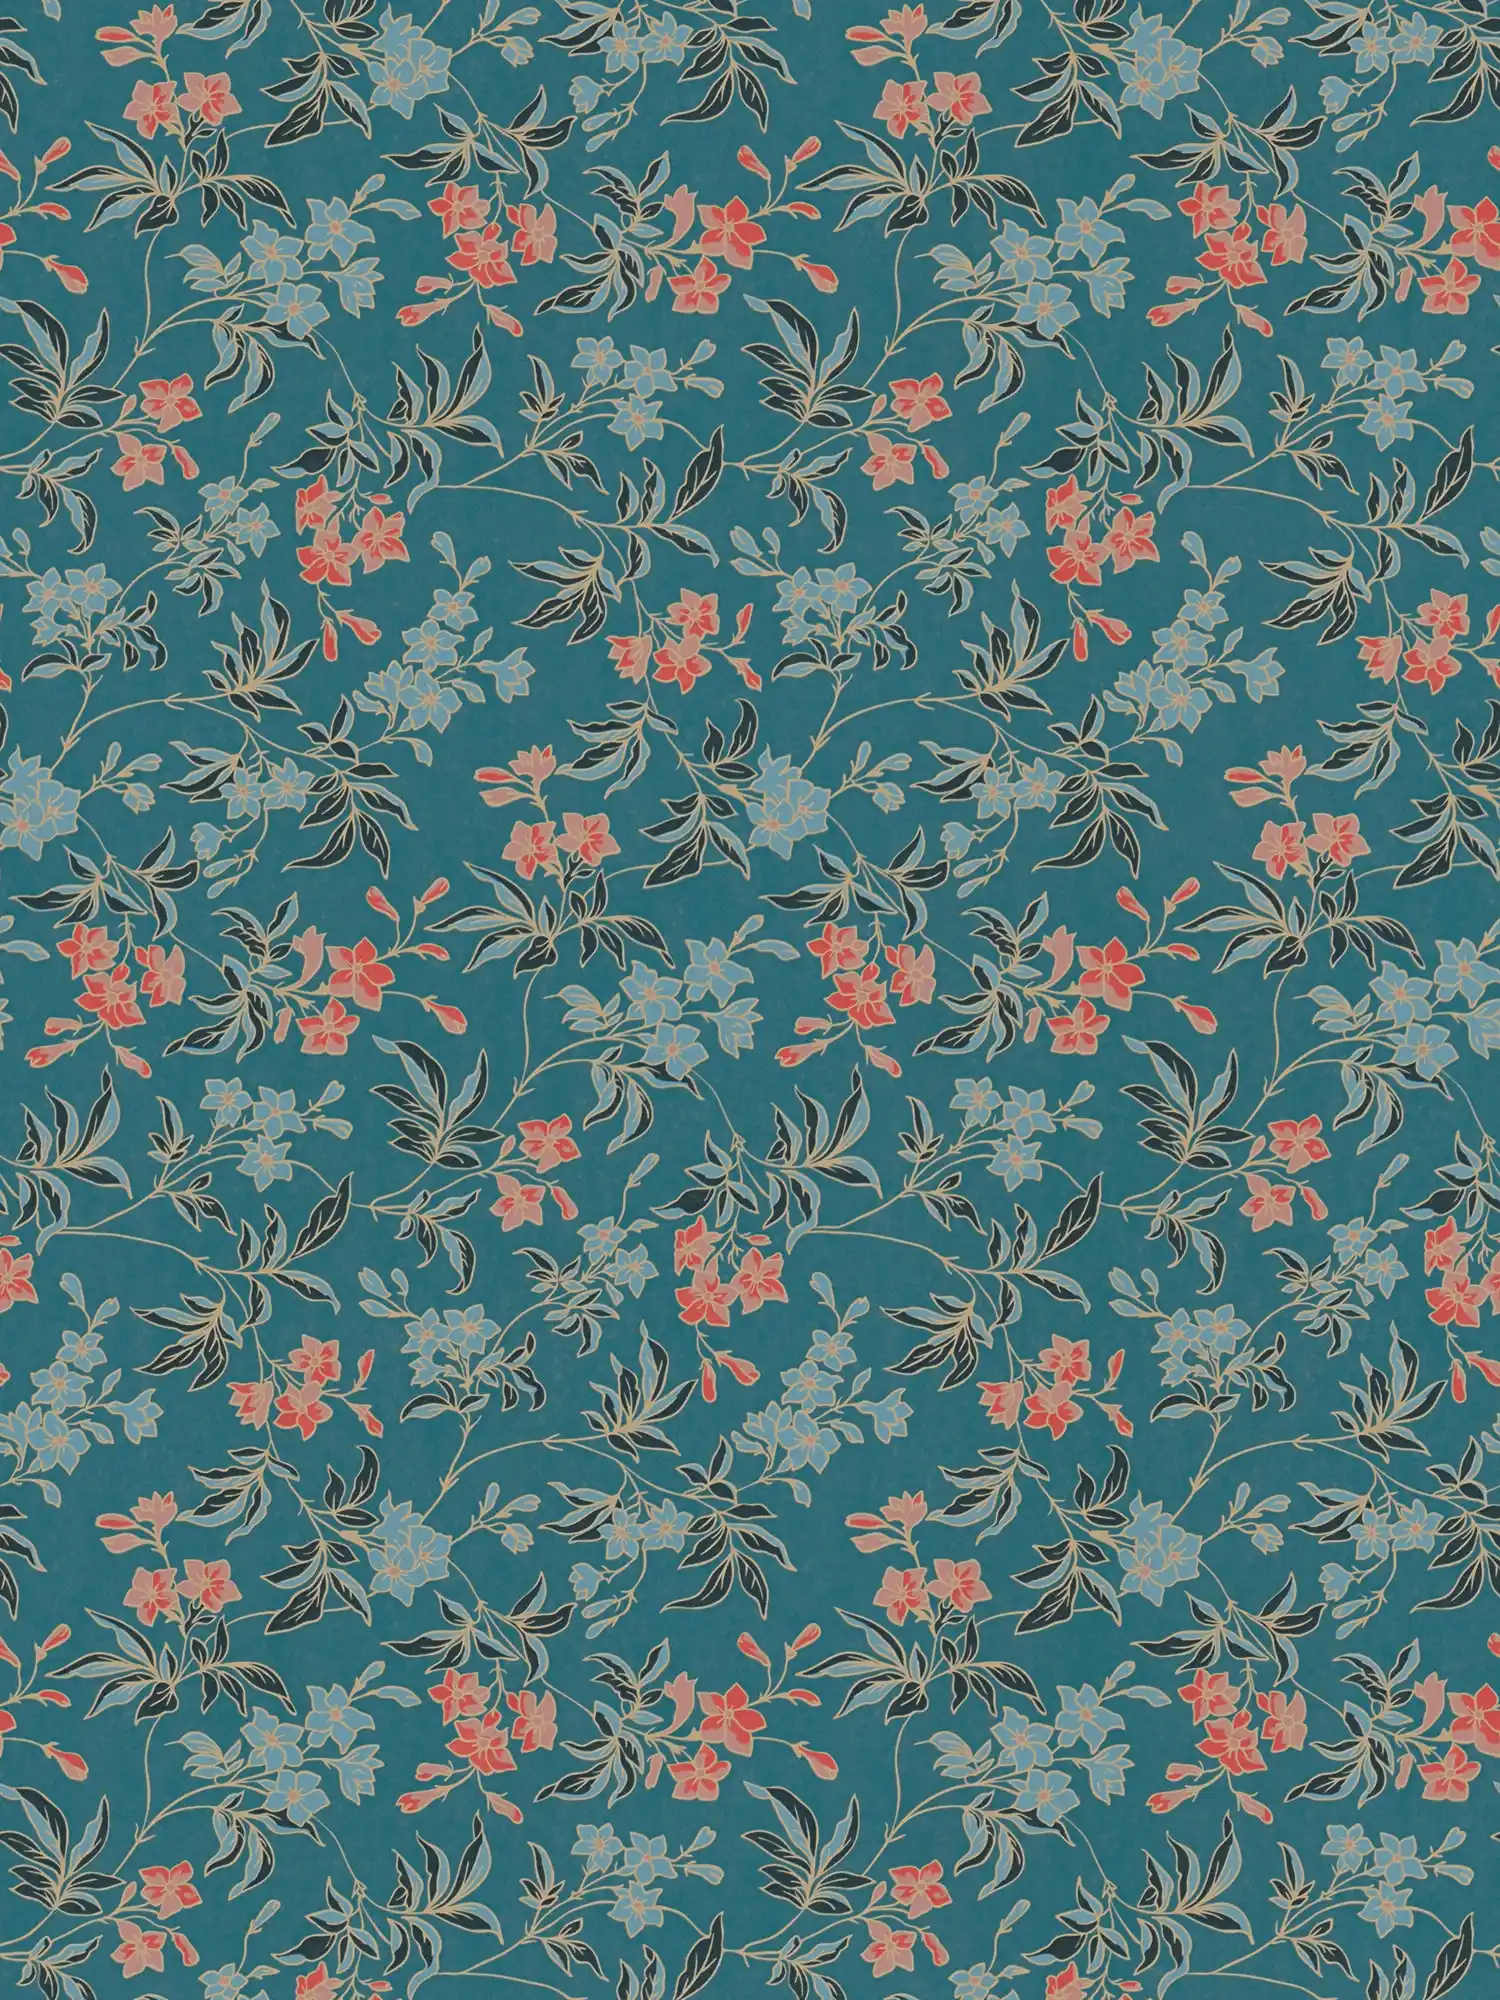 Flower tendrils non-woven wallpaper in English style - blue, red, yellow
